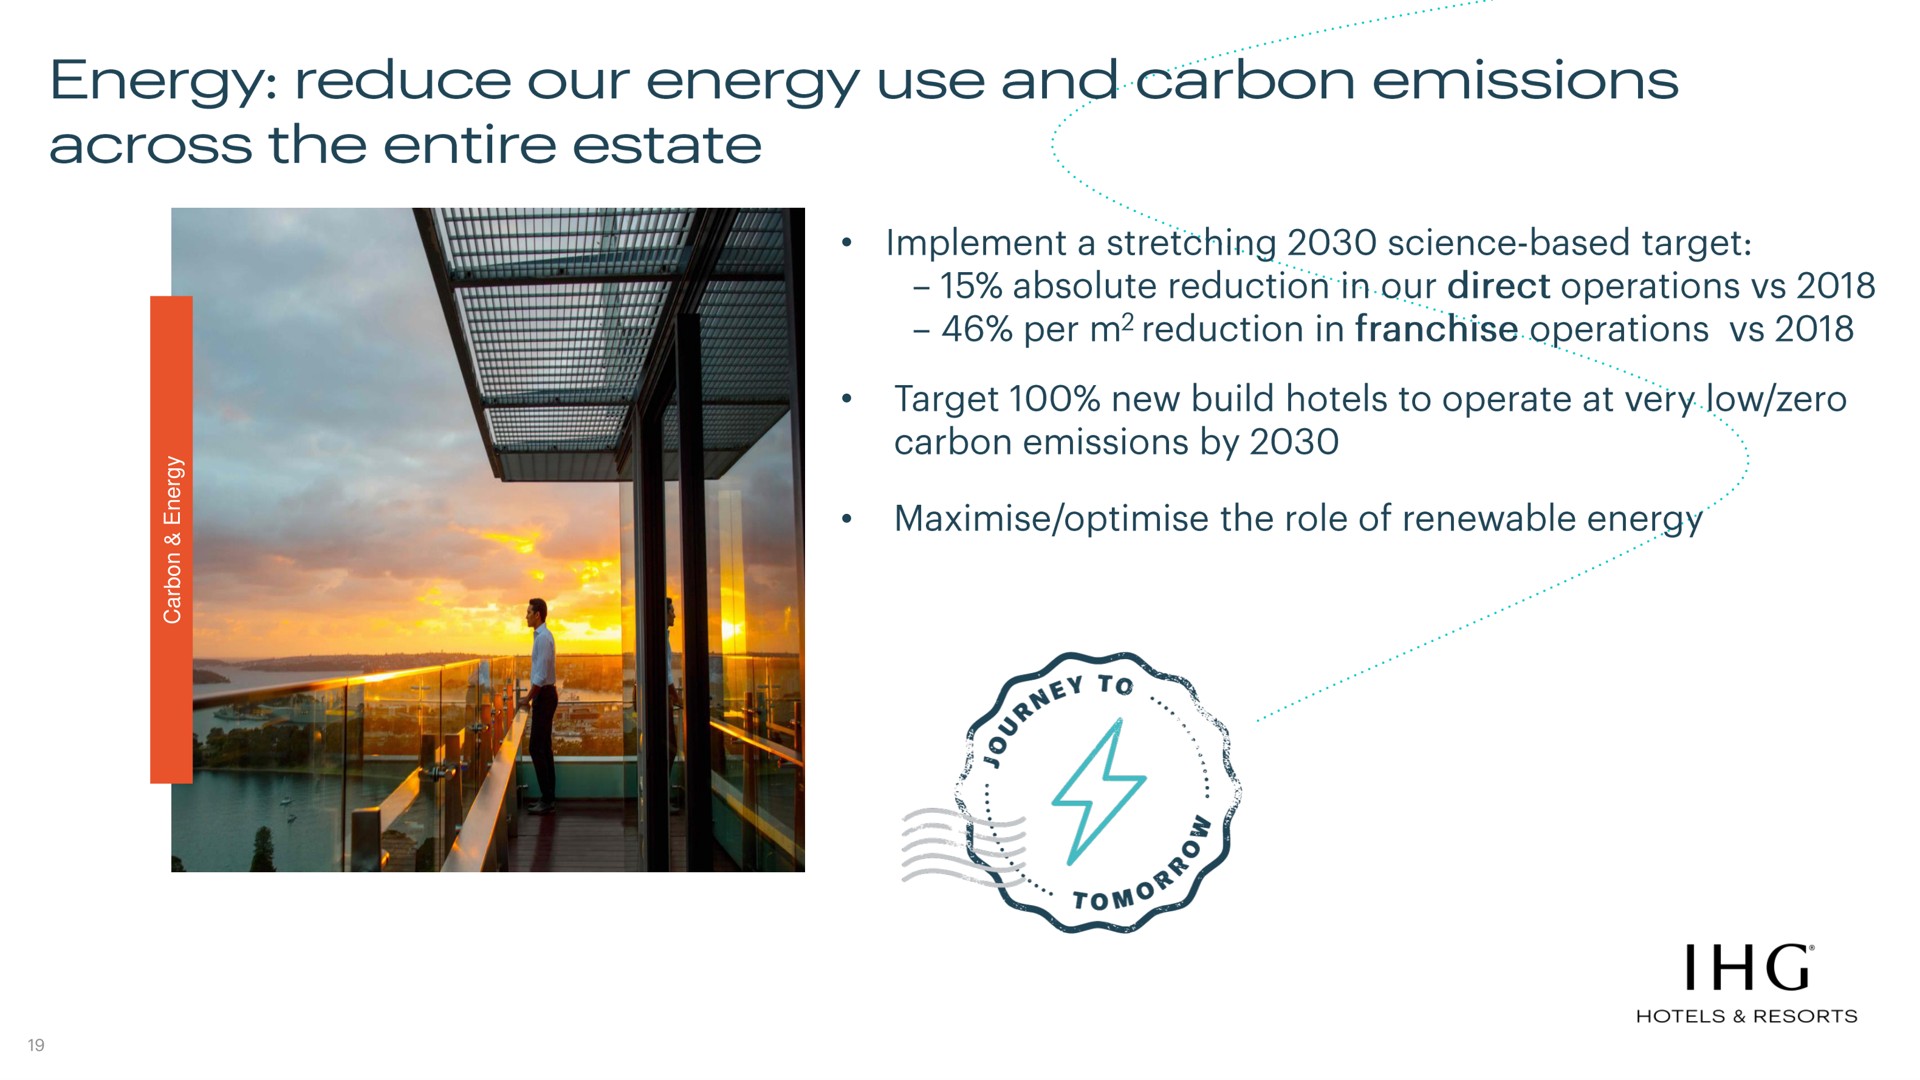 energy reduce our energy use and carbon emissions across the entire estate of | IHG Hotels